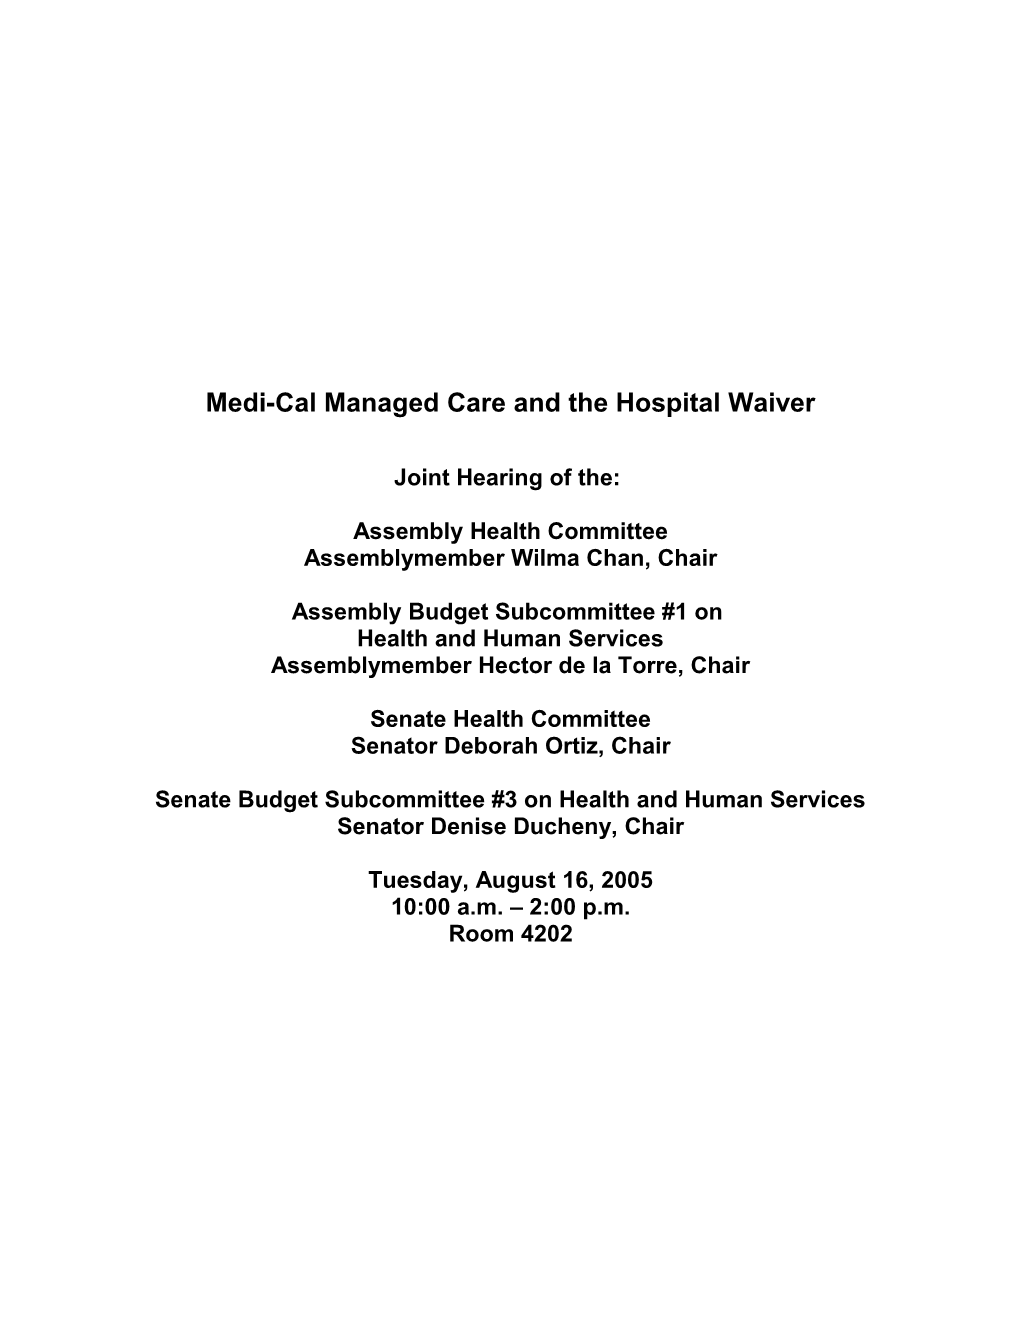 For the 2005-2006 Fiscal Year the Administration Proposed an Expansion of Medi-Cal Managed Care